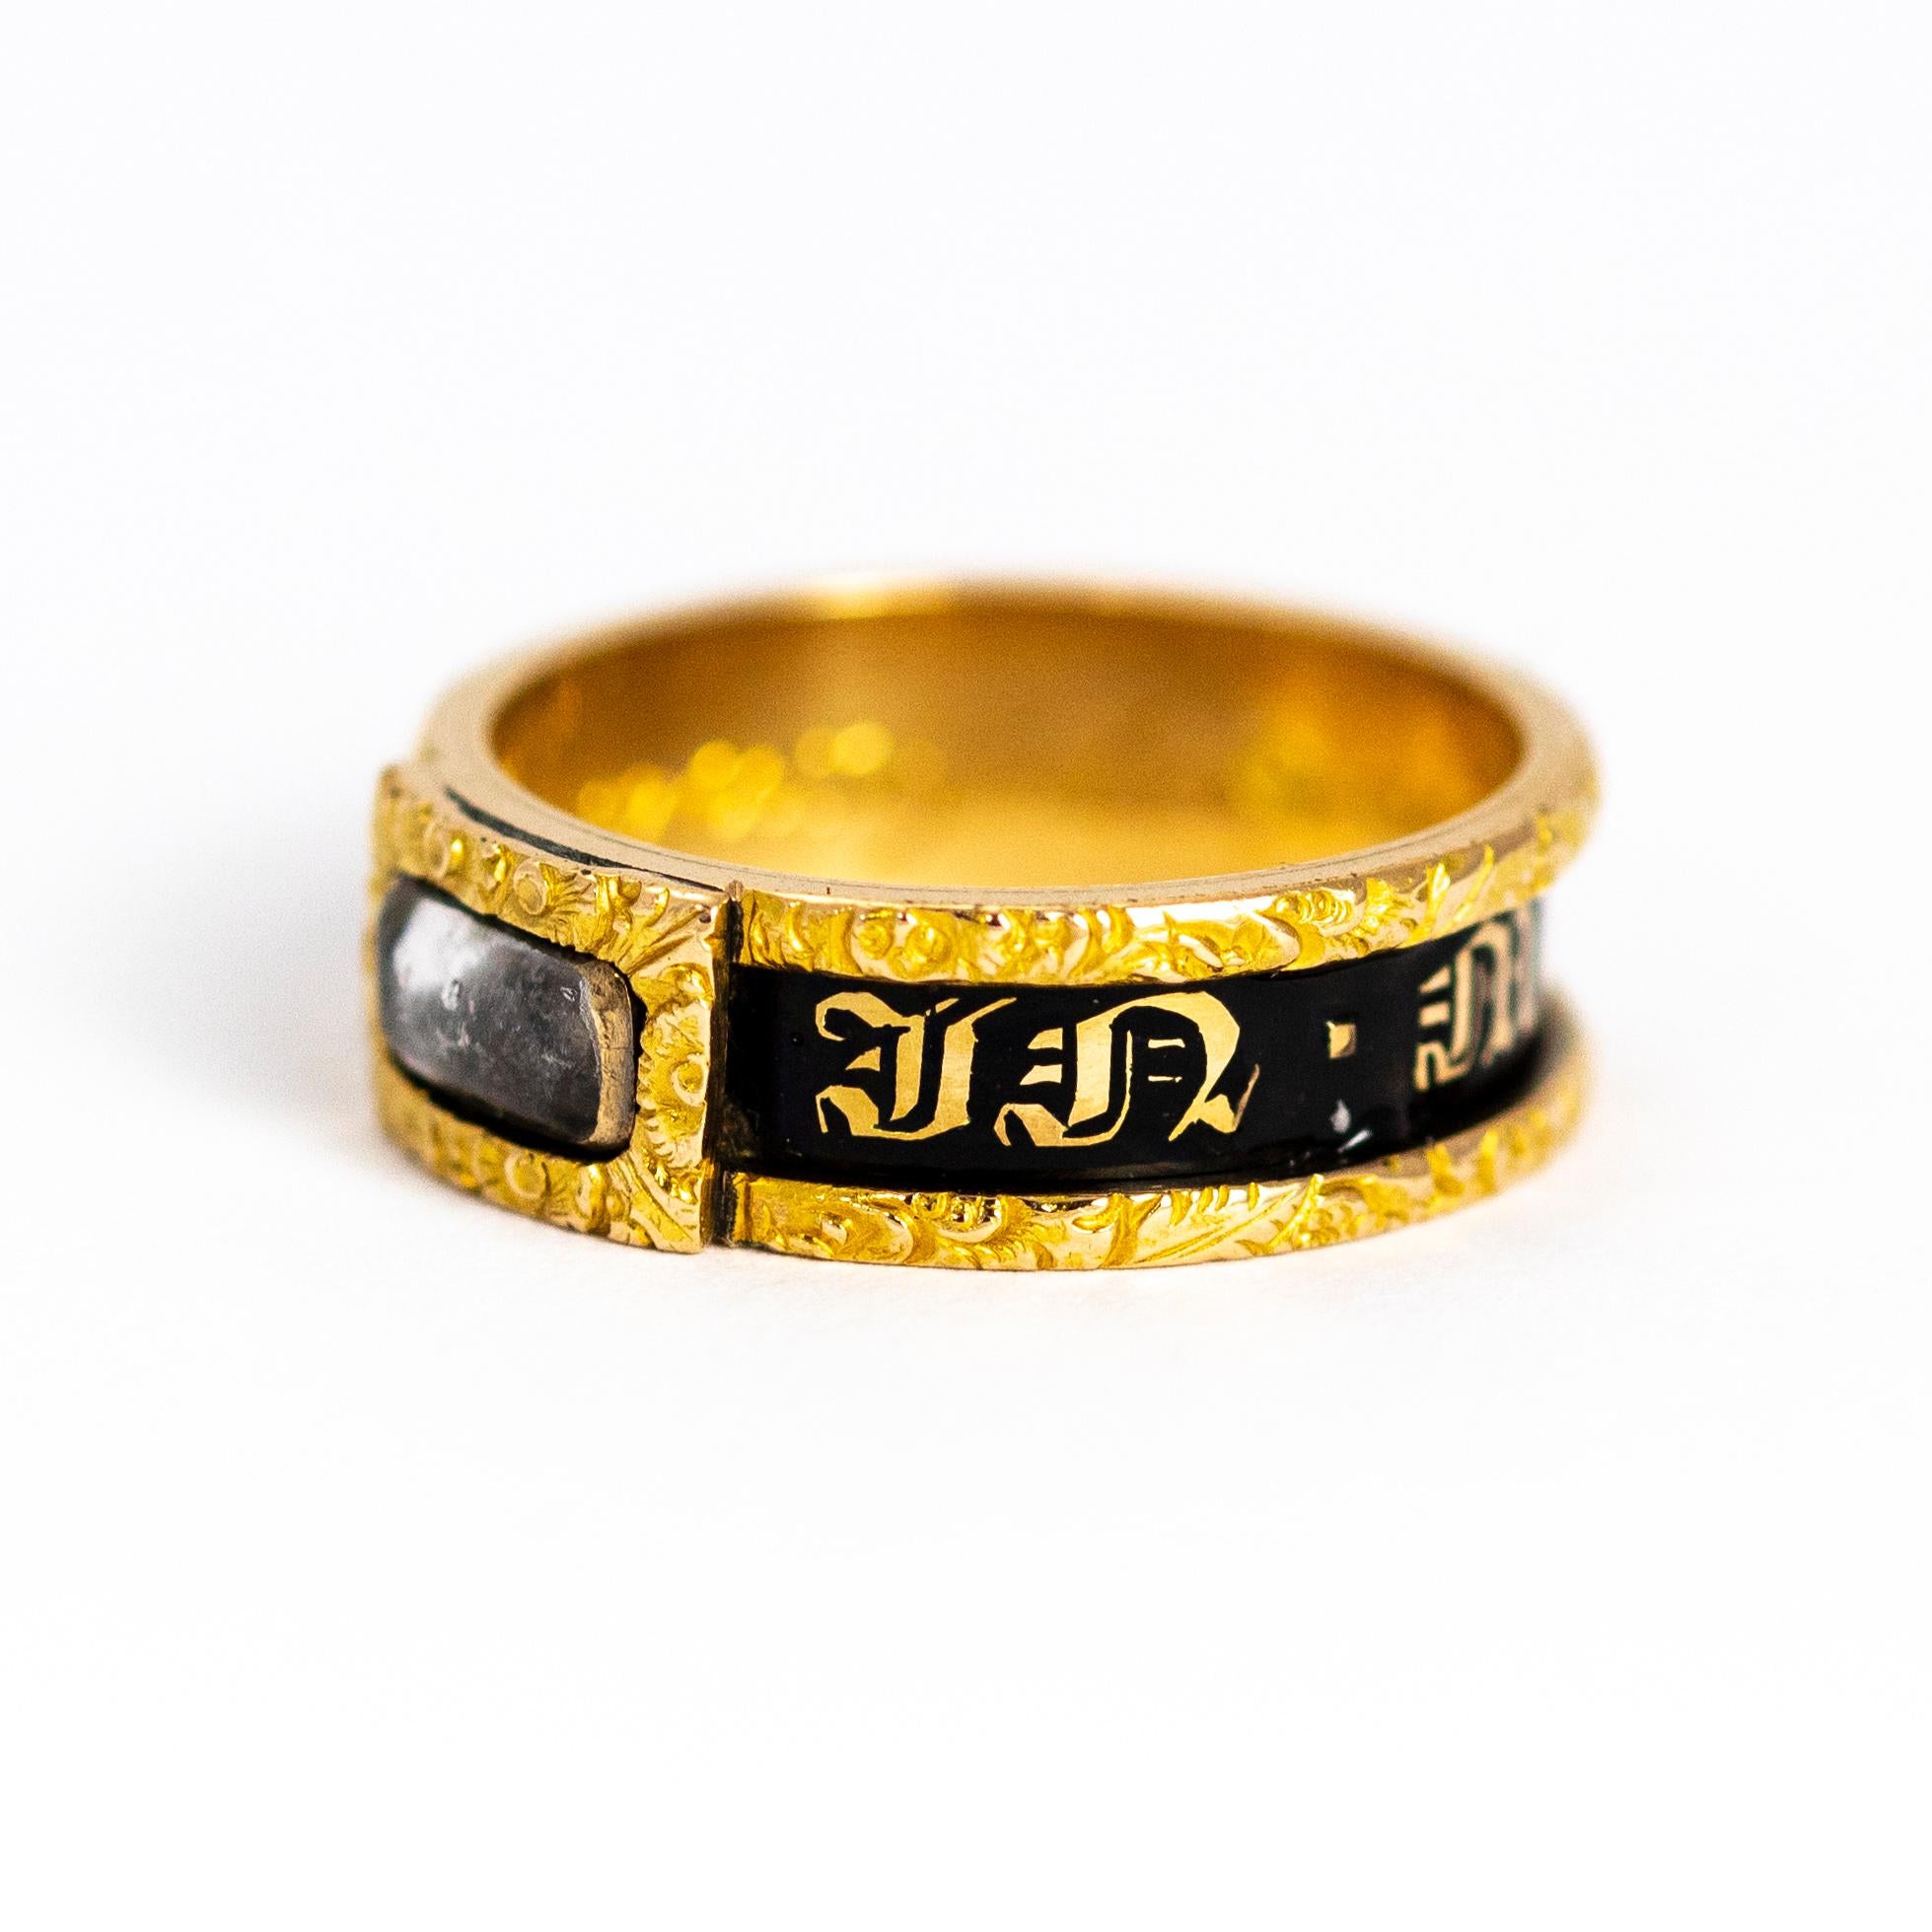 Sweet mourning band with black enamel and fine gold detail. This ring features a locket front holding a plait of hair behind a crystal panel. The inscription on the inner band reads 